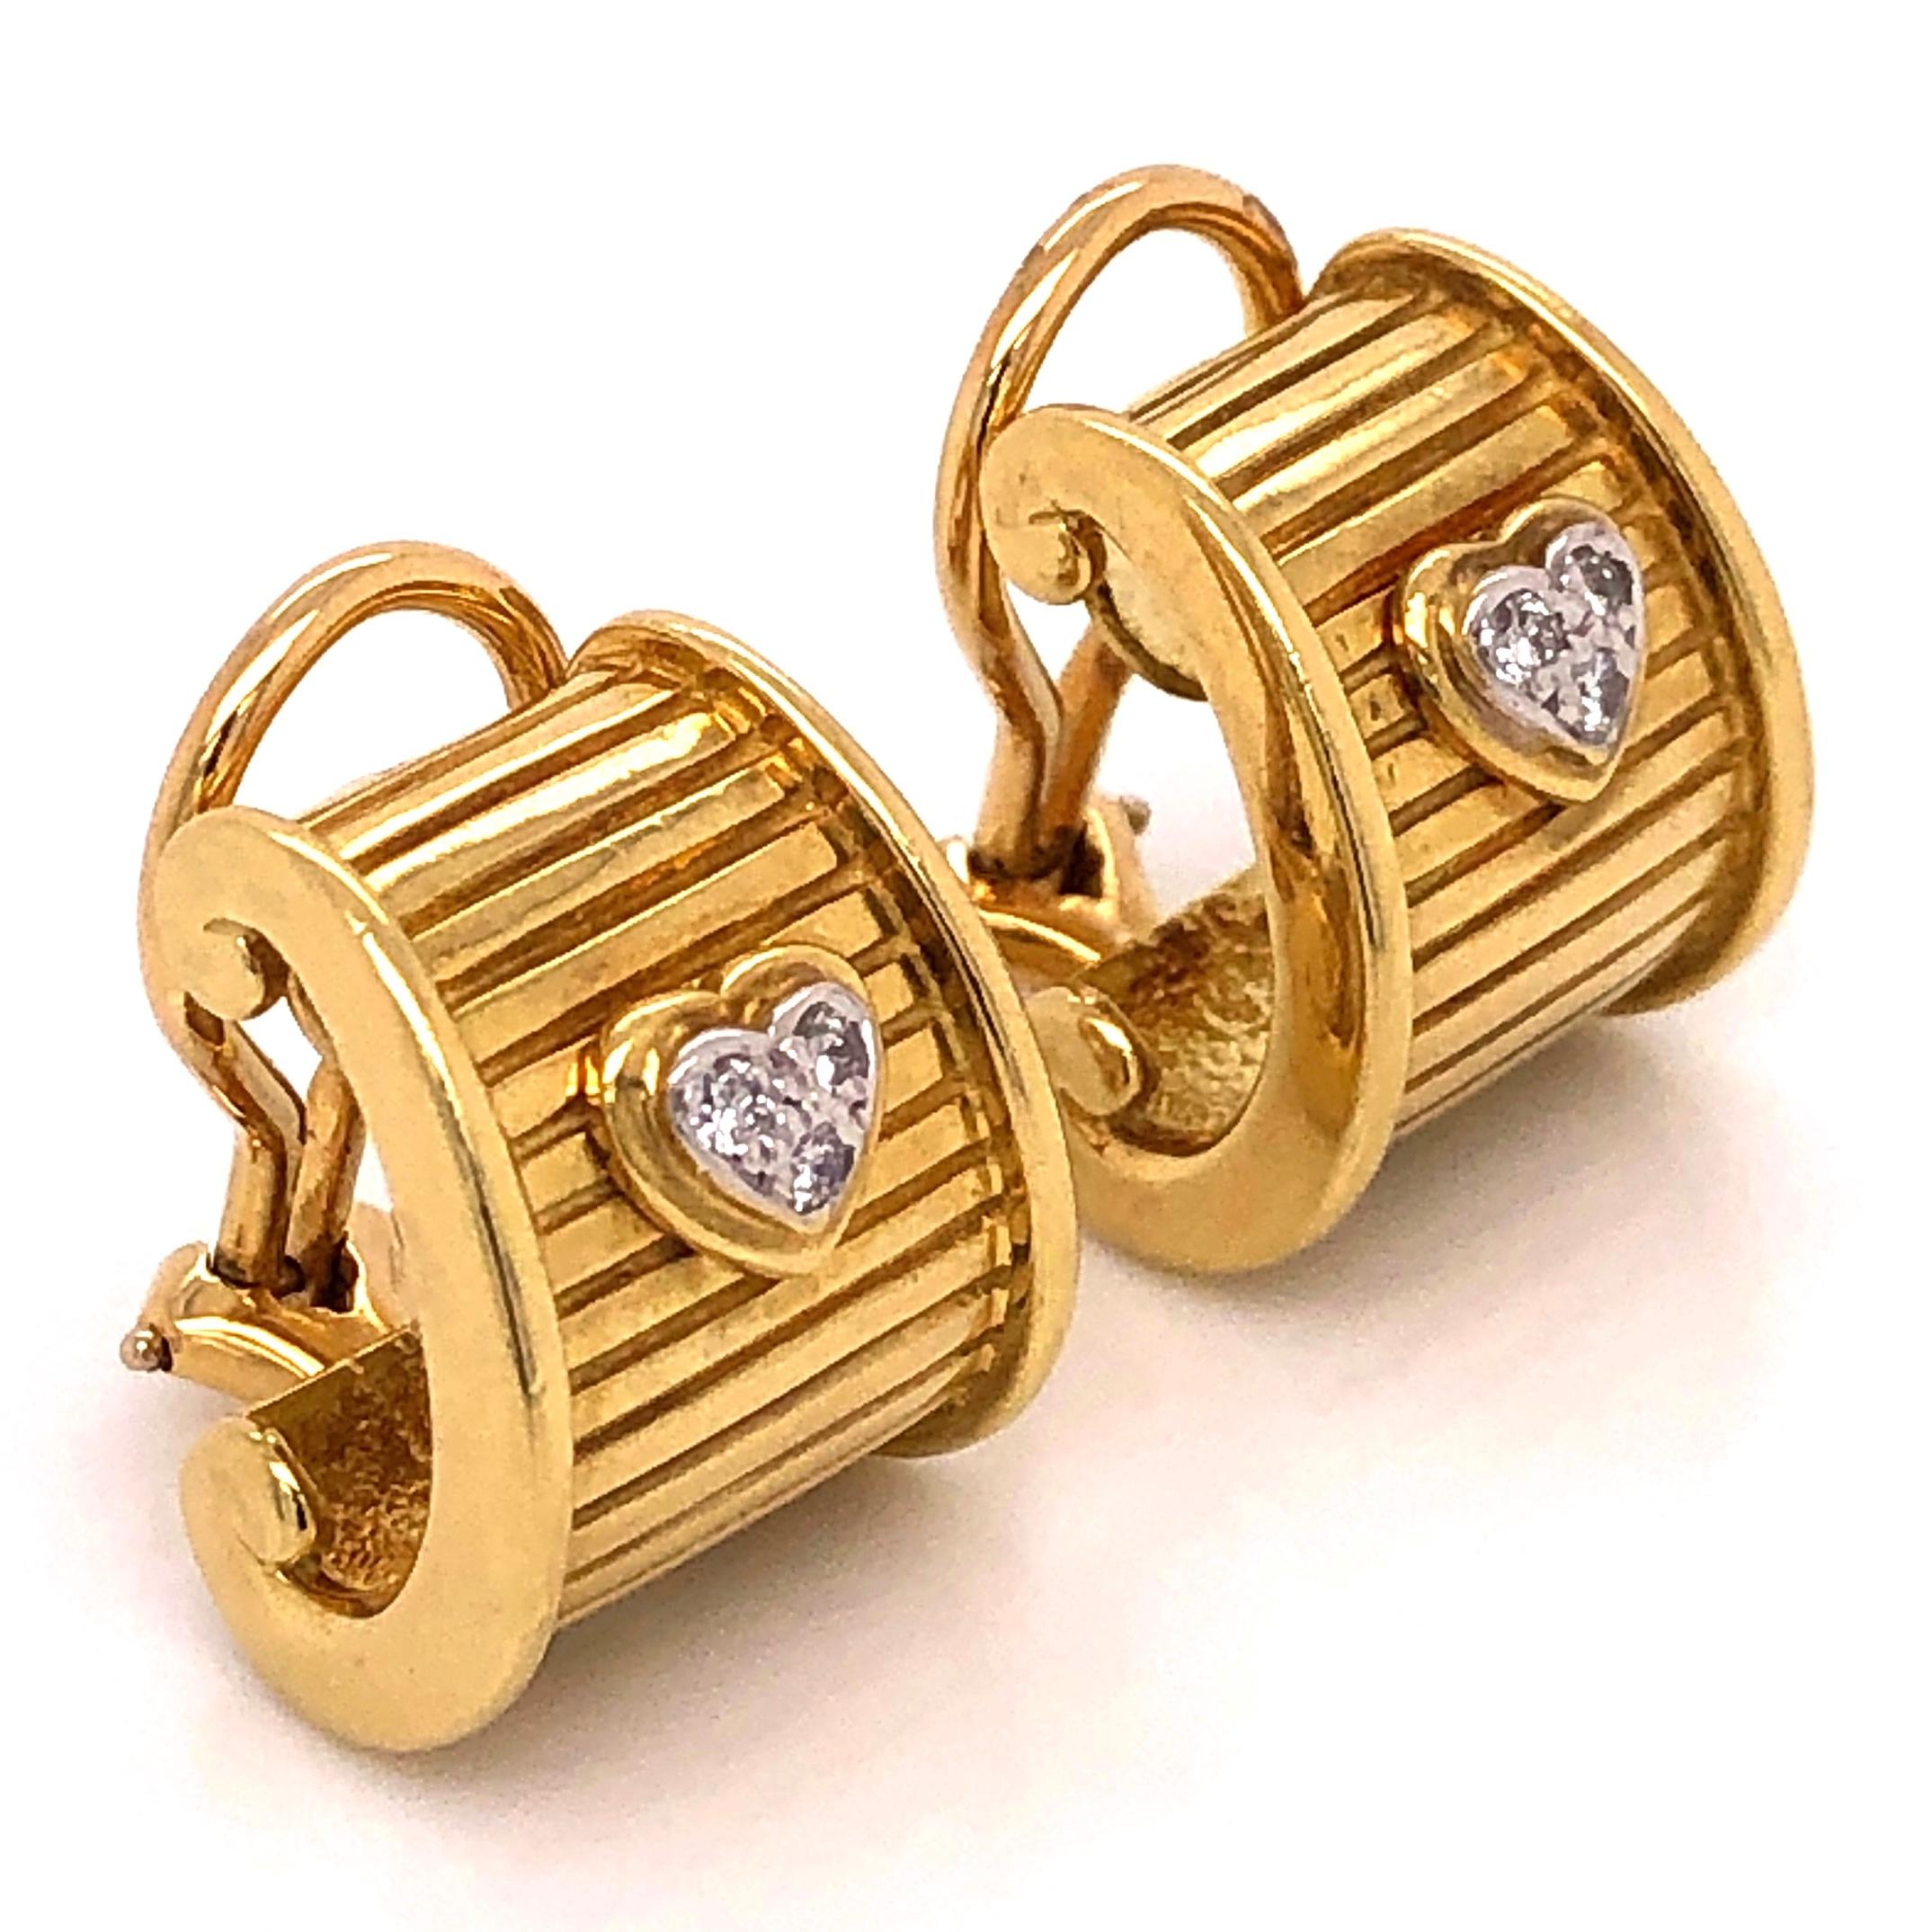 Simply Beautiful! Signed DKW Designer 18 Karat Yellow Gold Earrings. Each set with a Pave Diamond Heart. Approx. 0.12tcw. Hand crafted in 18 Karat Yellow Gold Ribbed design. French Clips; No post system. Measuring approx. 5/8